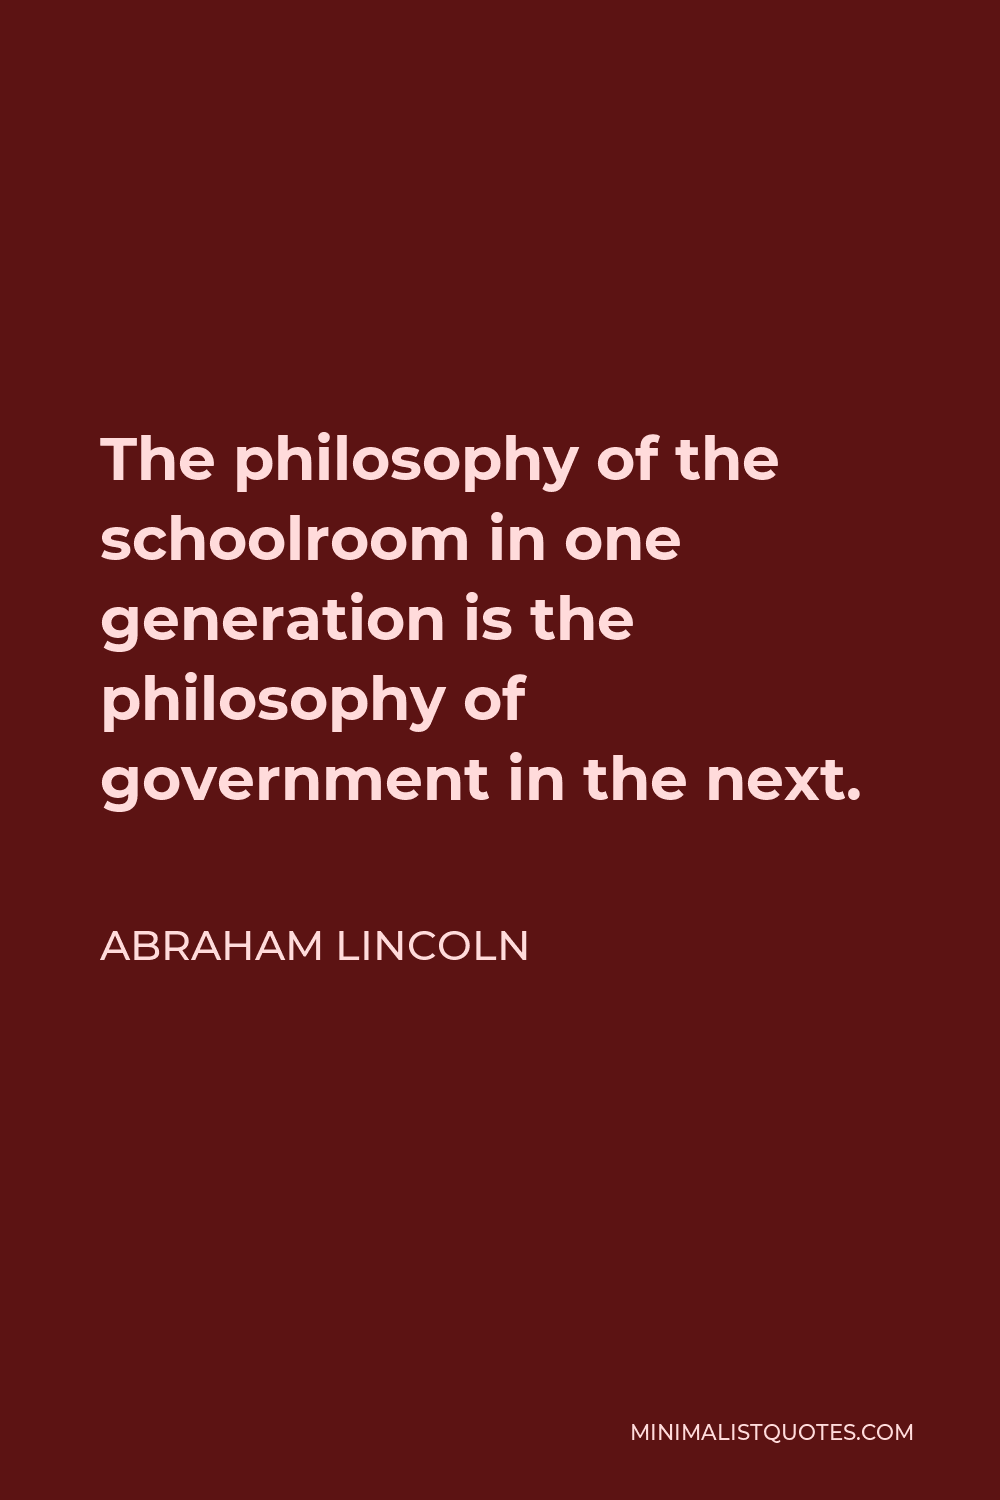 Abraham Lincoln Quote: The philosophy of the schoolroom in one ...